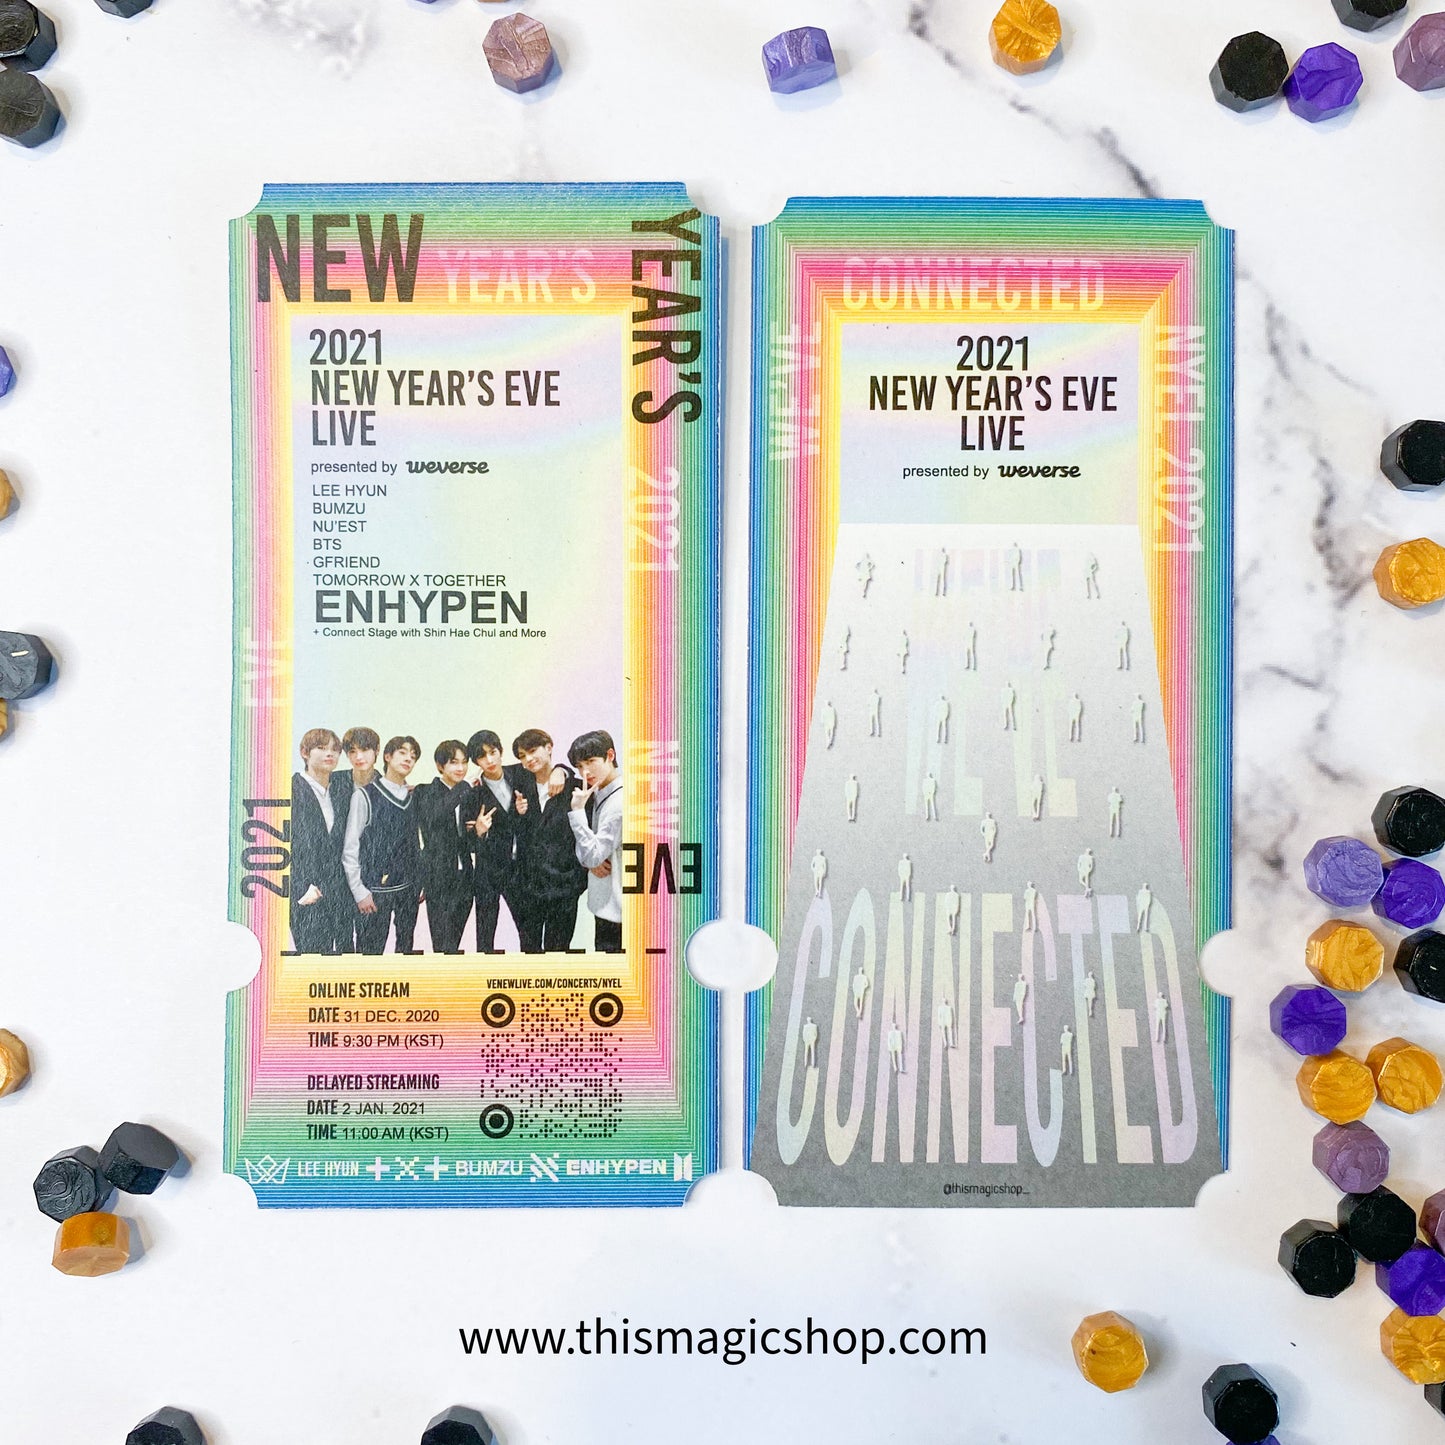 BTS NYEL 2021 New Year's Live commemorative concert ticket